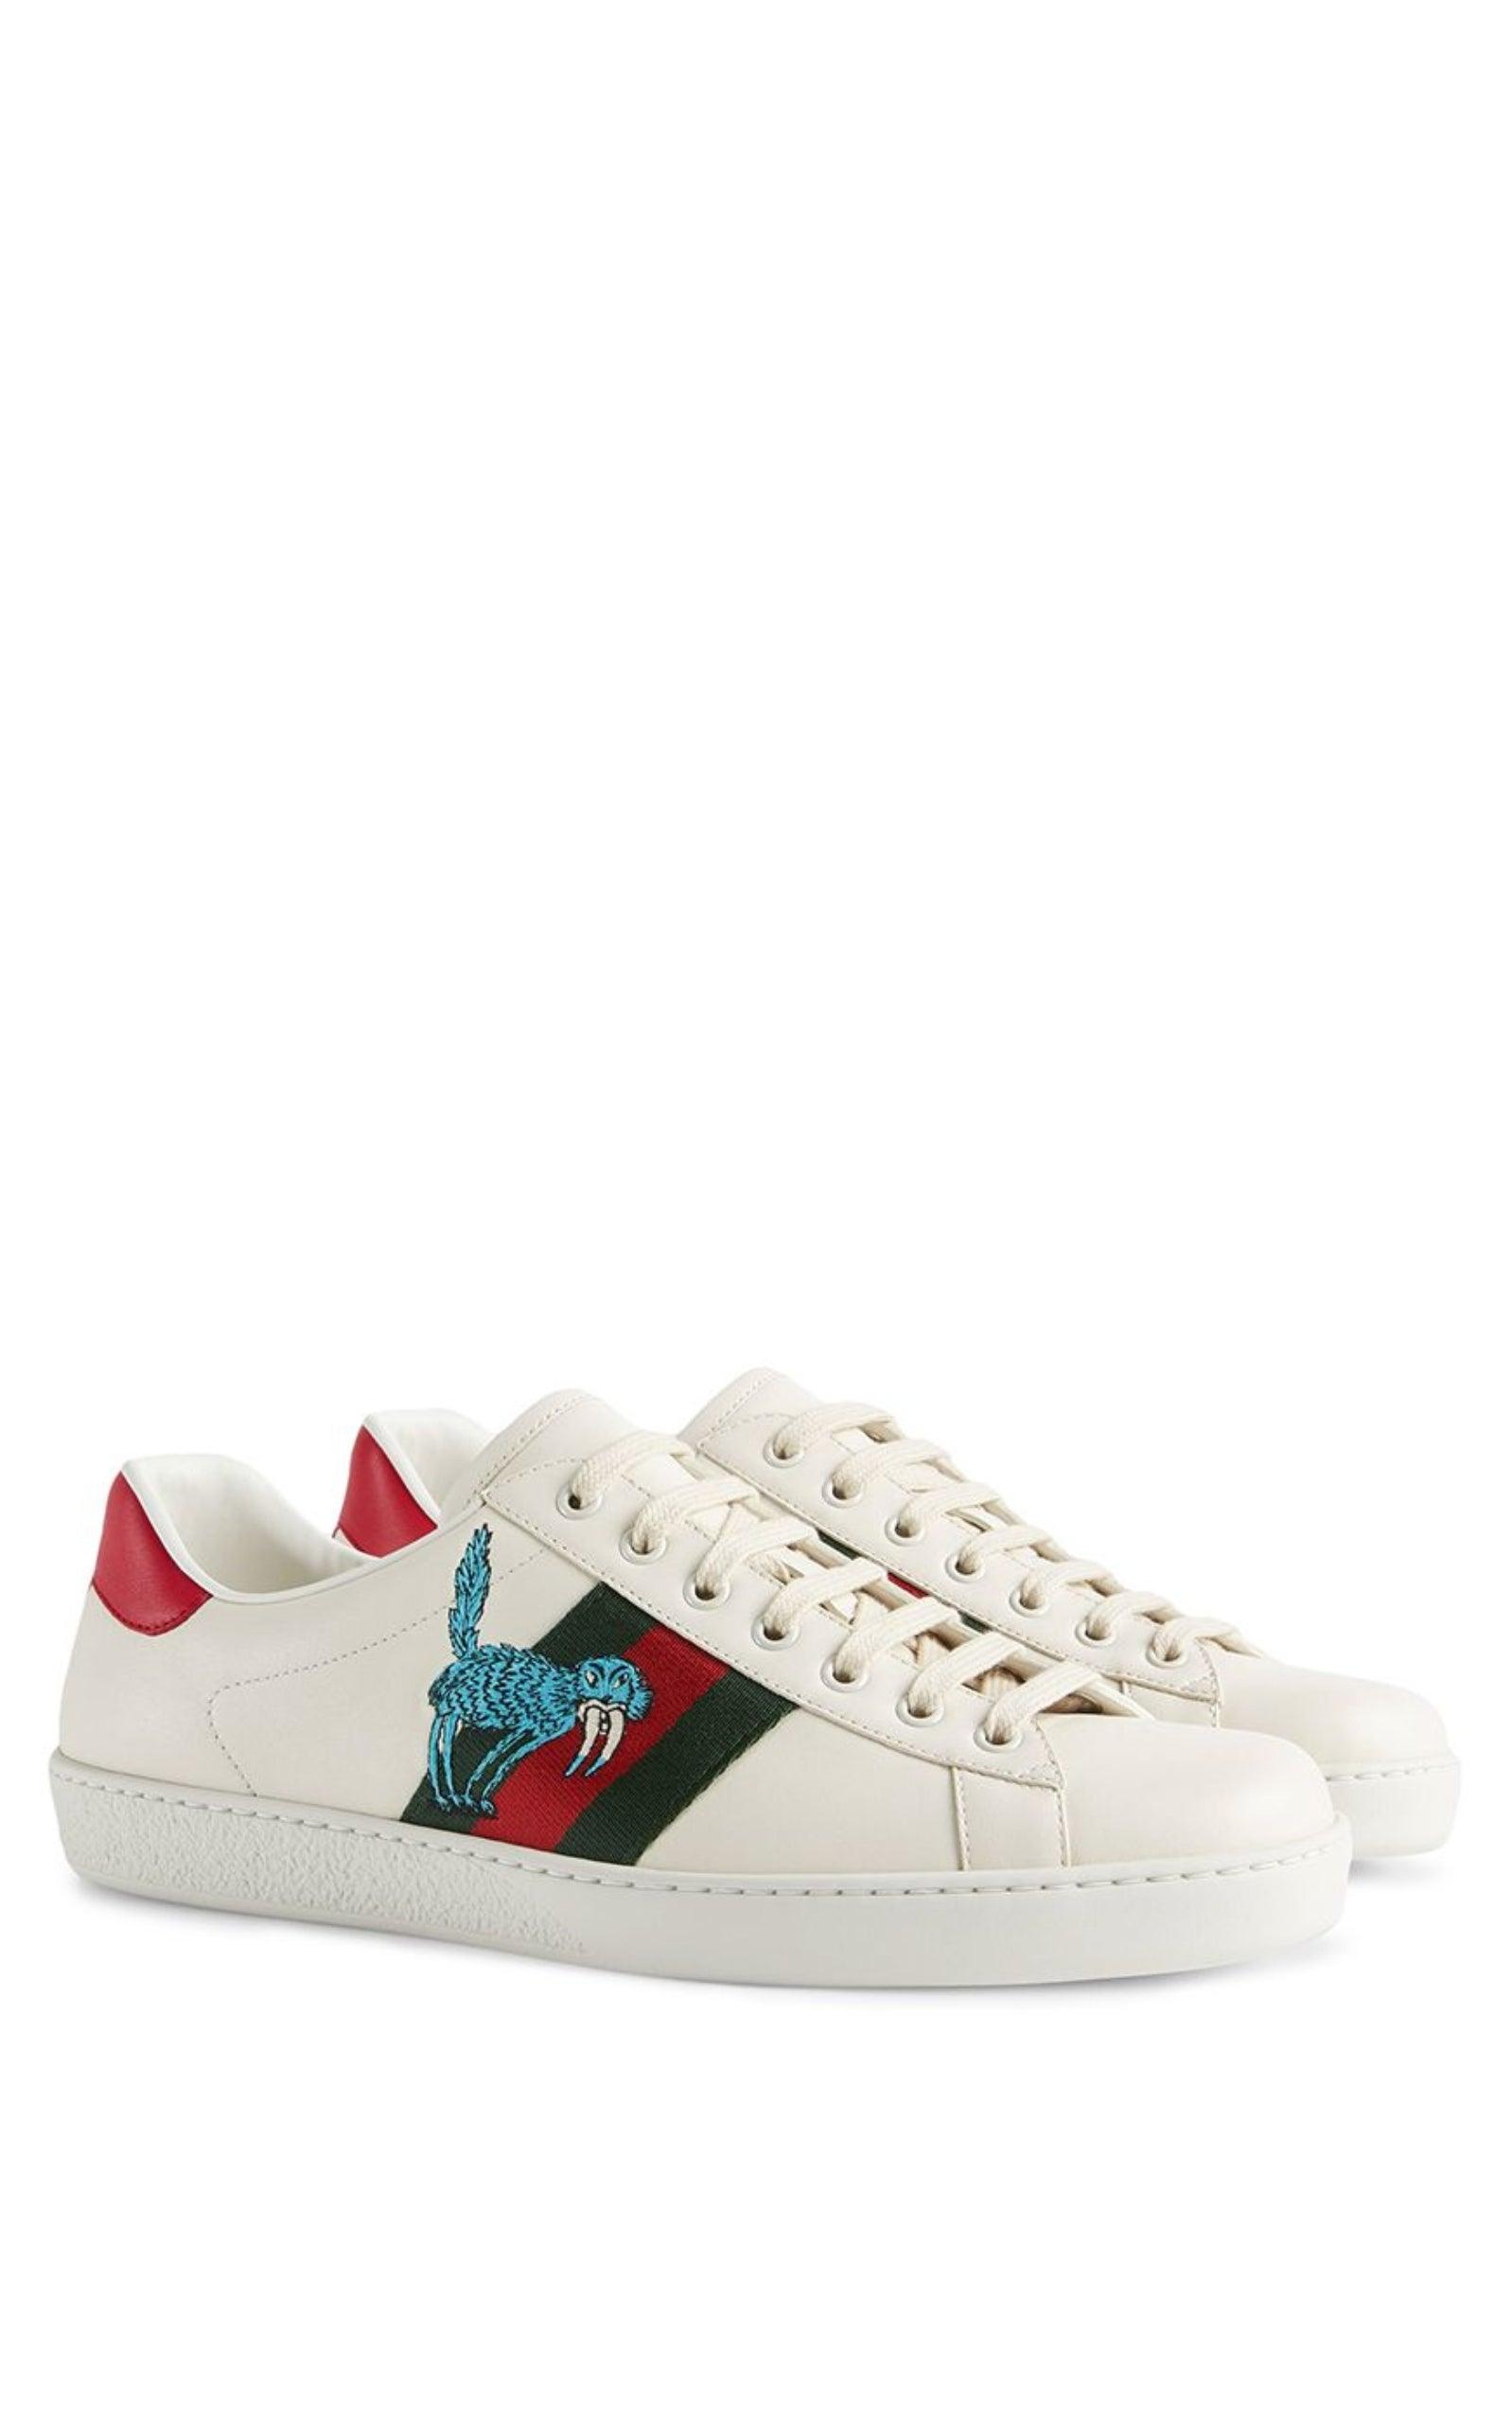 Gucci White Leather Kingsnake Ace Sneakers Size 41 Gucci